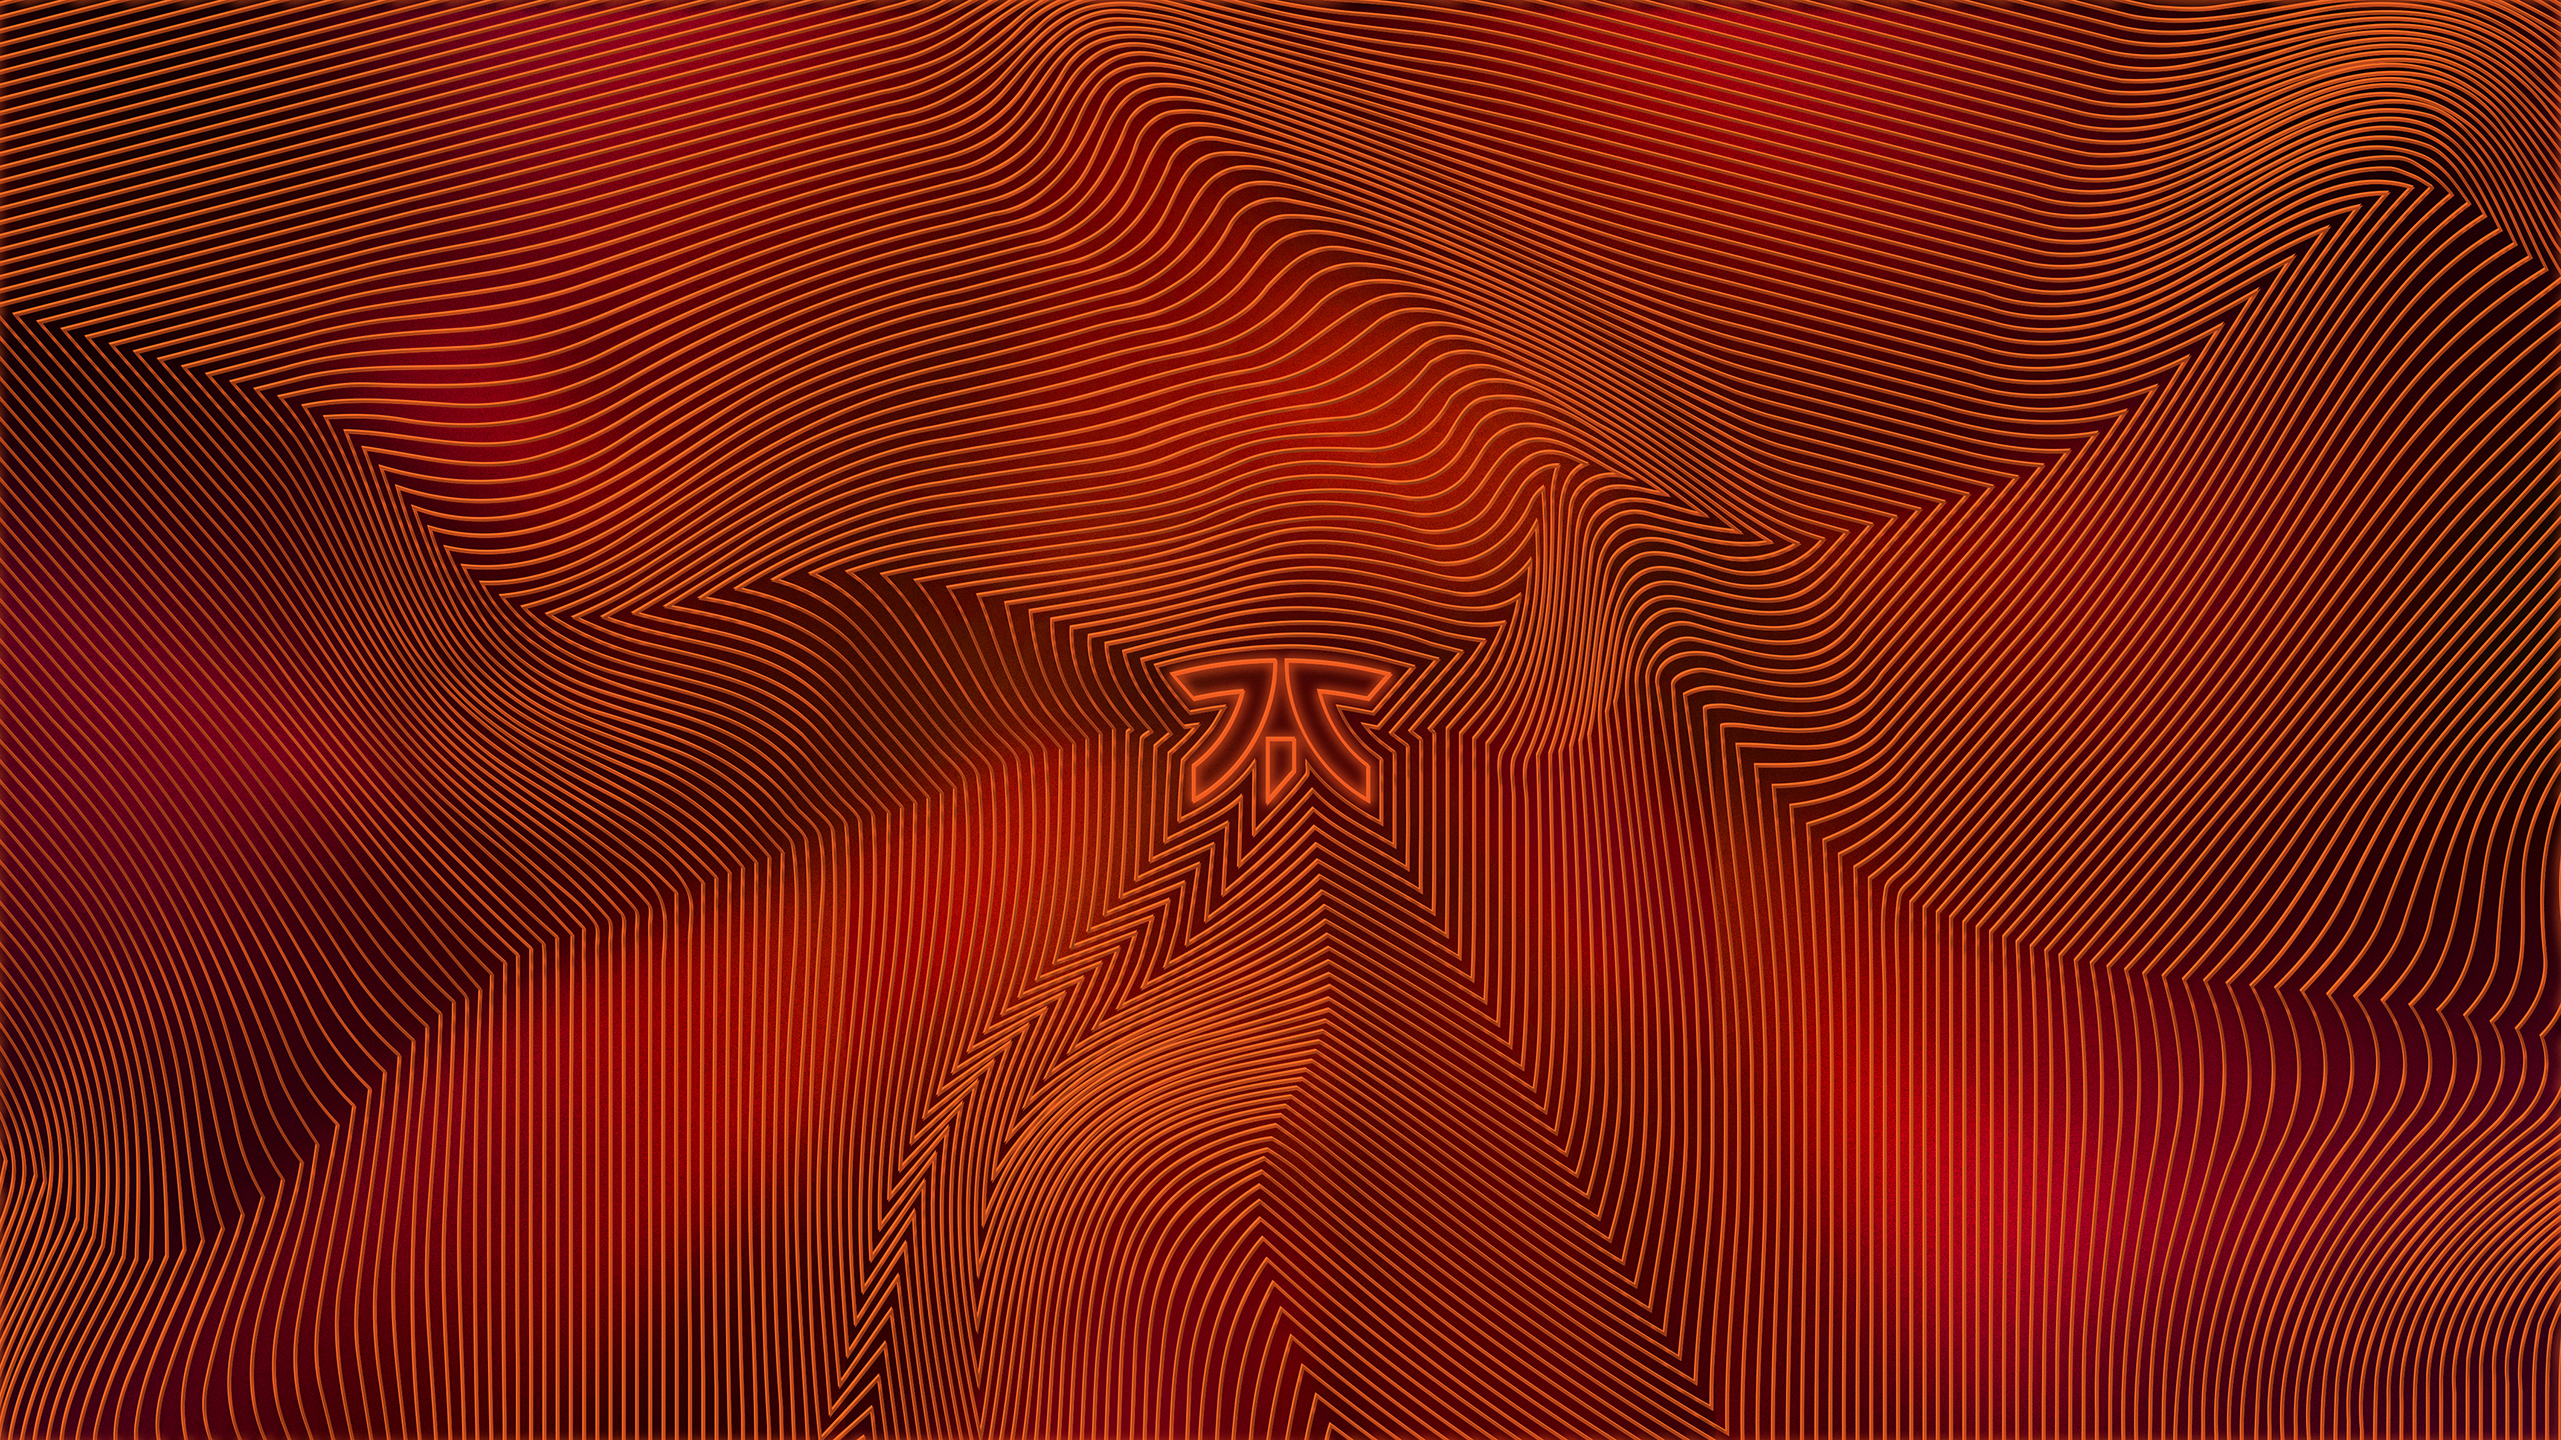 General 2561x1440 Fnatic abstract minimalism